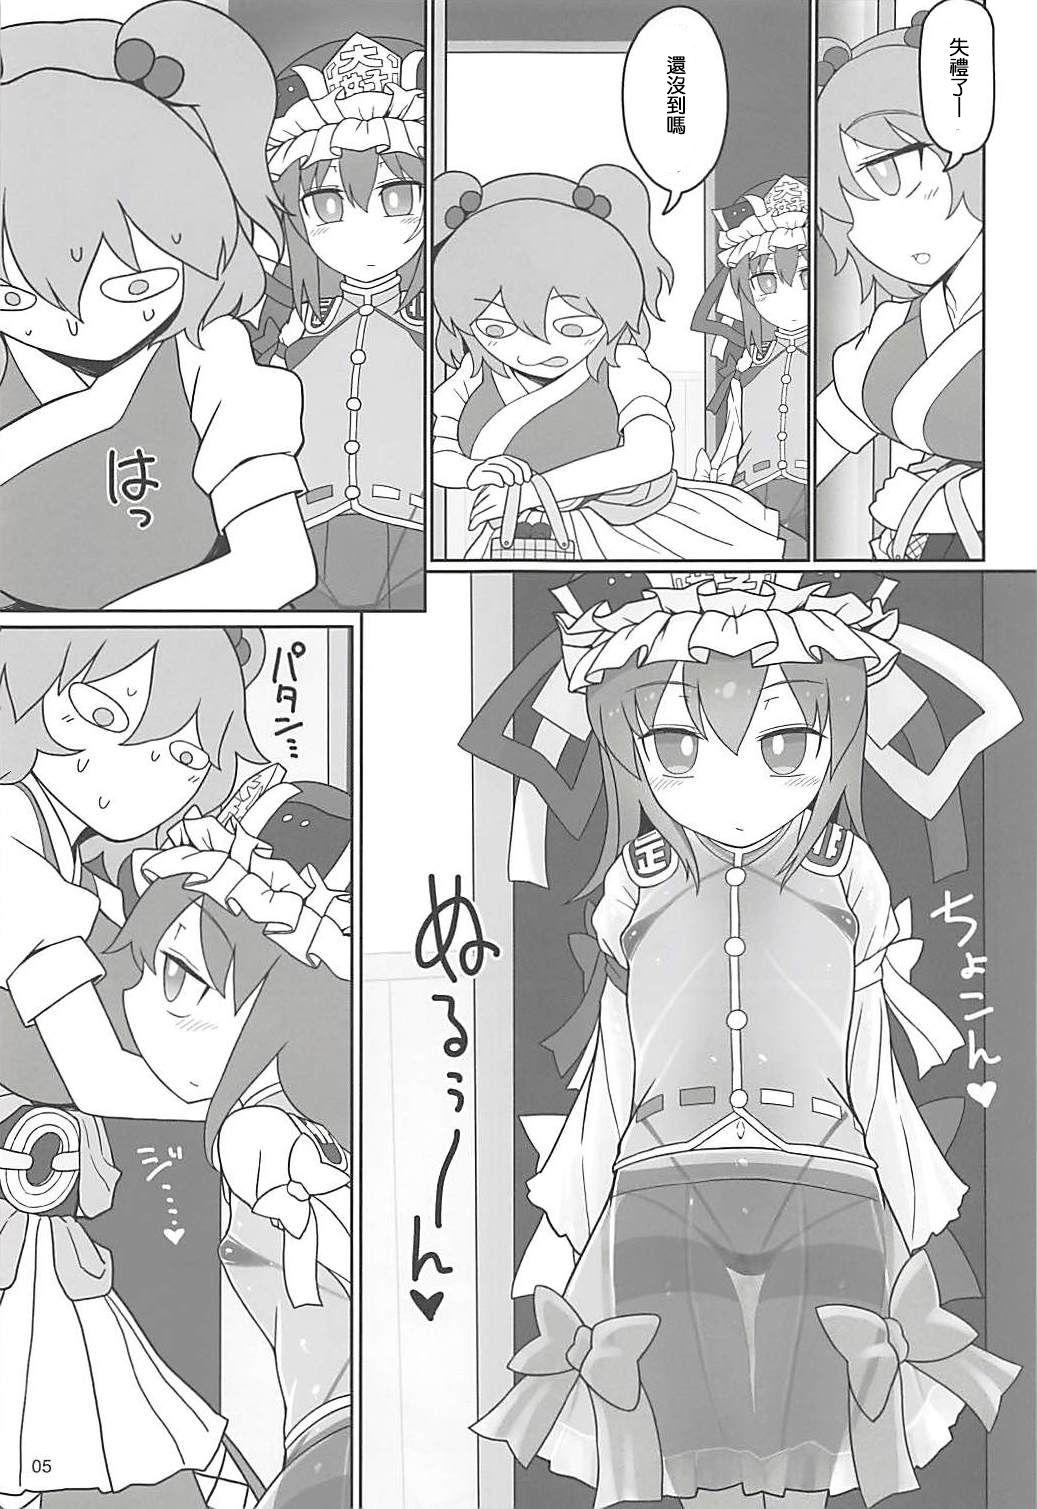 Hoe Enma Lover | 阎魔Lover - Touhou project Exgf - Page 4